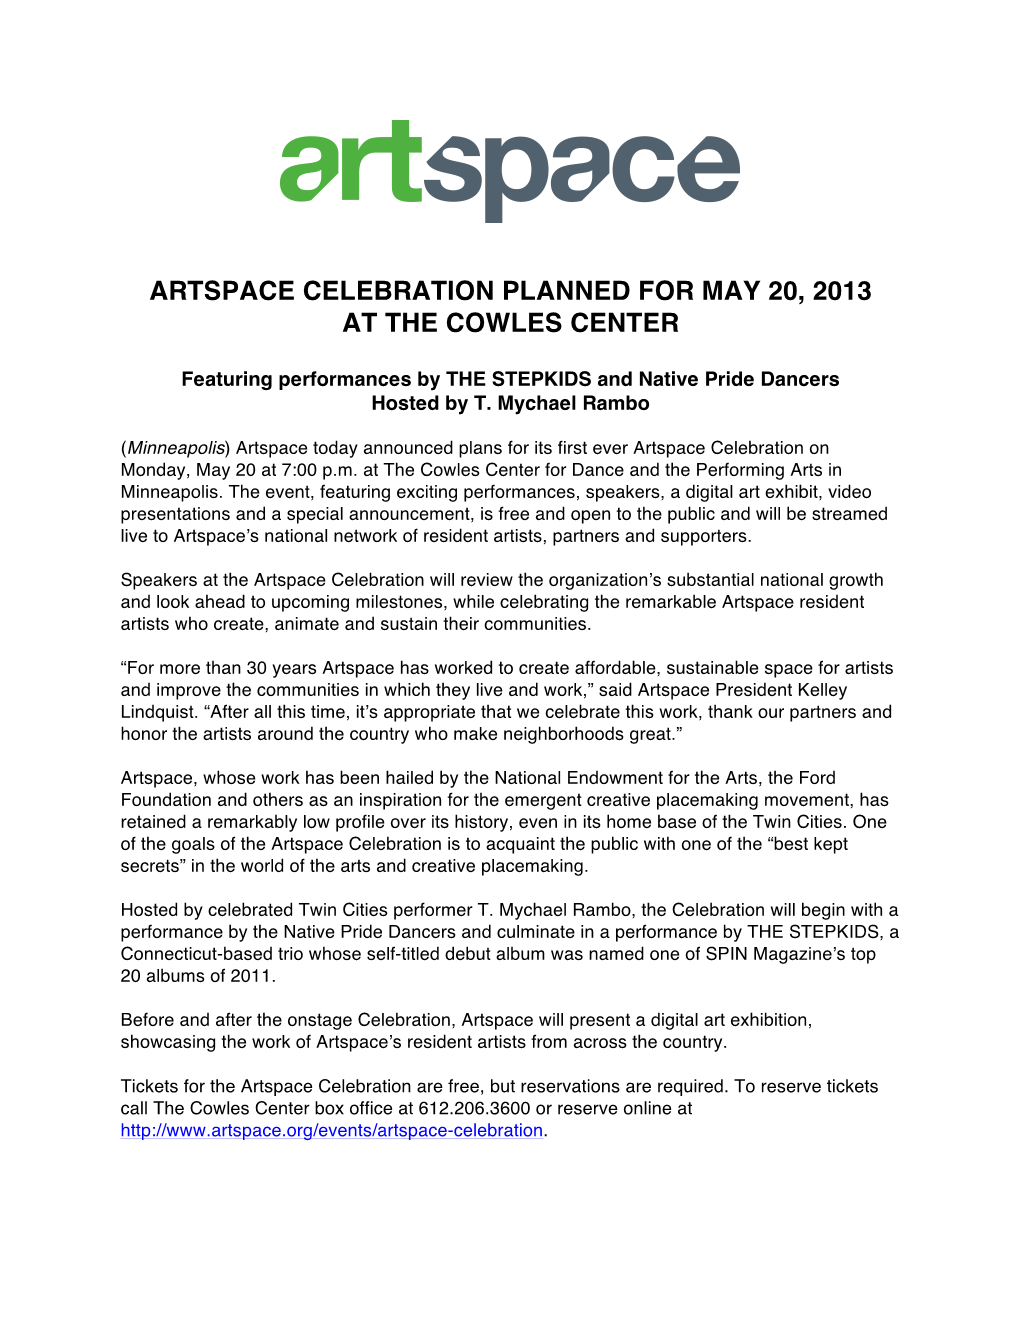 Artspace Celebration Planned for May 20, 2013 at the Cowles Center